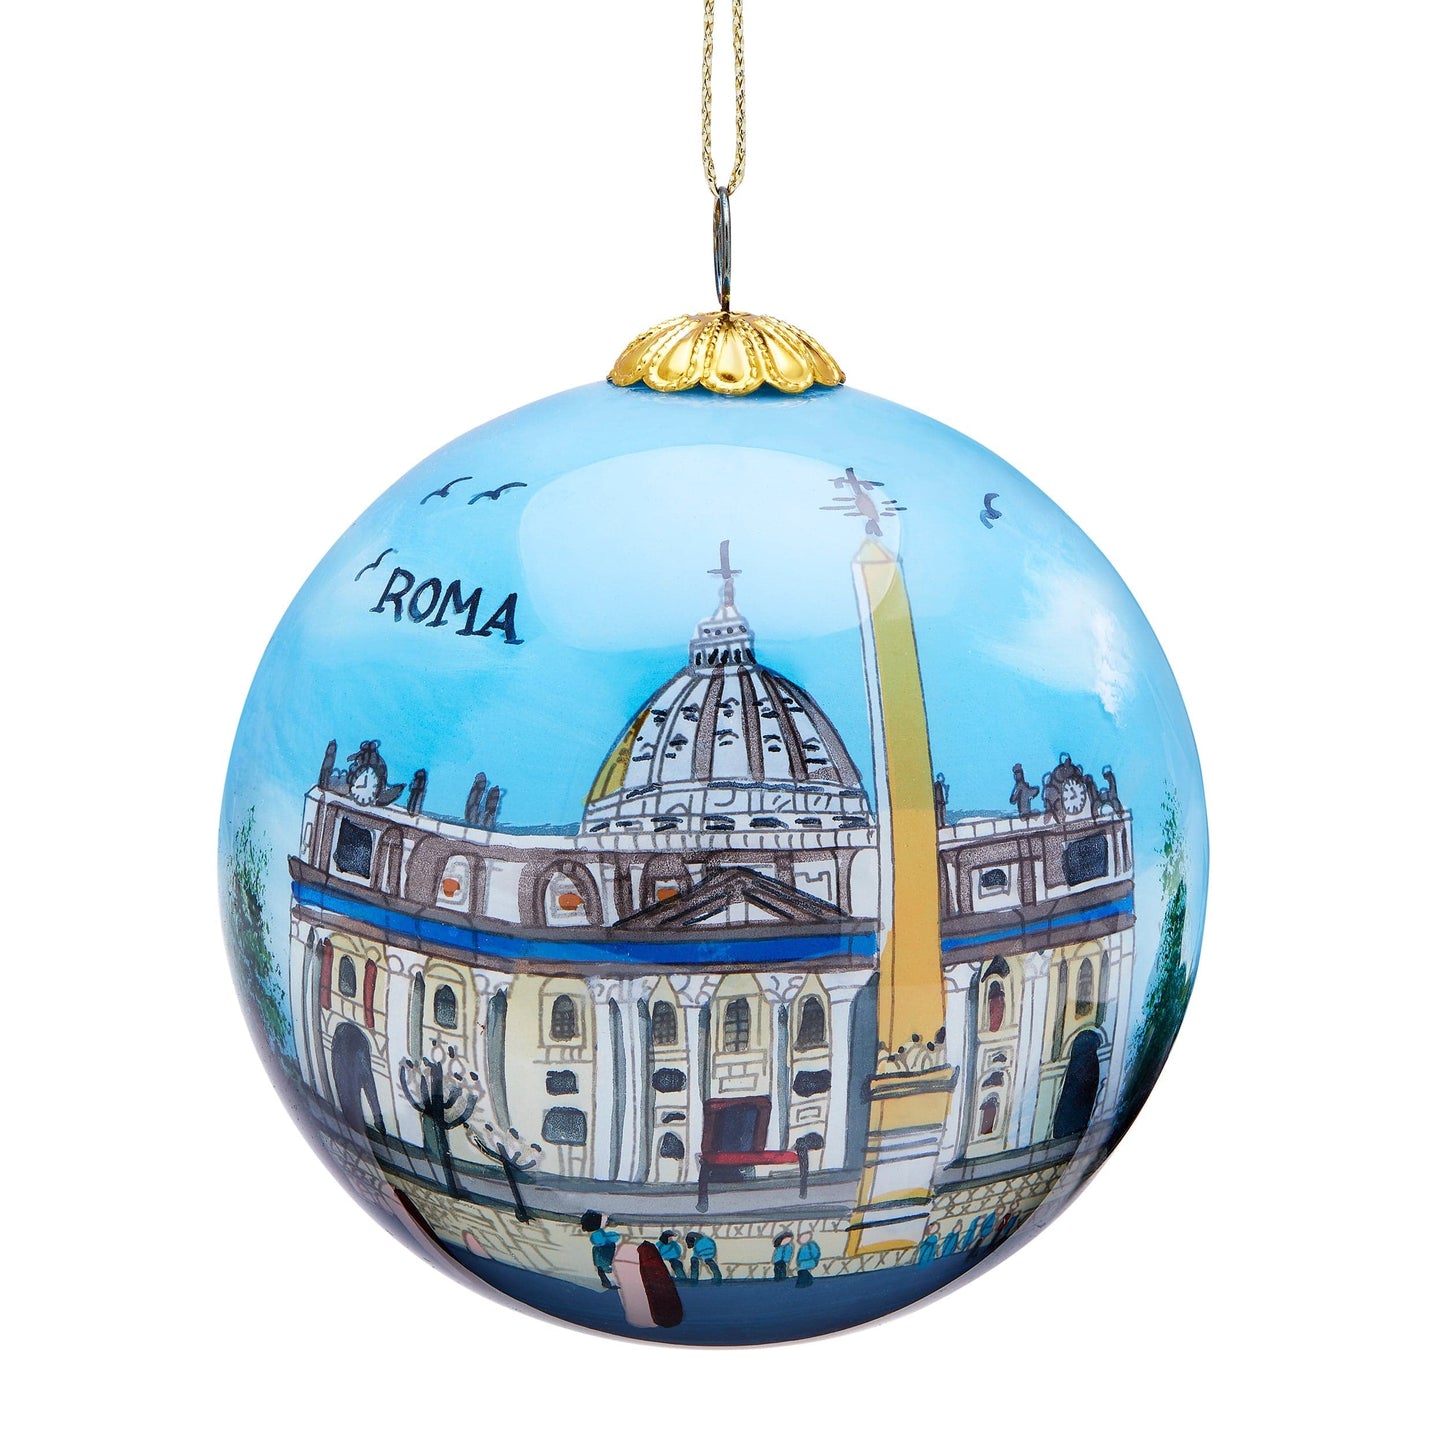 MONDO CATTOLICO Christmas Tree Ball of Saint Peter Basilica by day